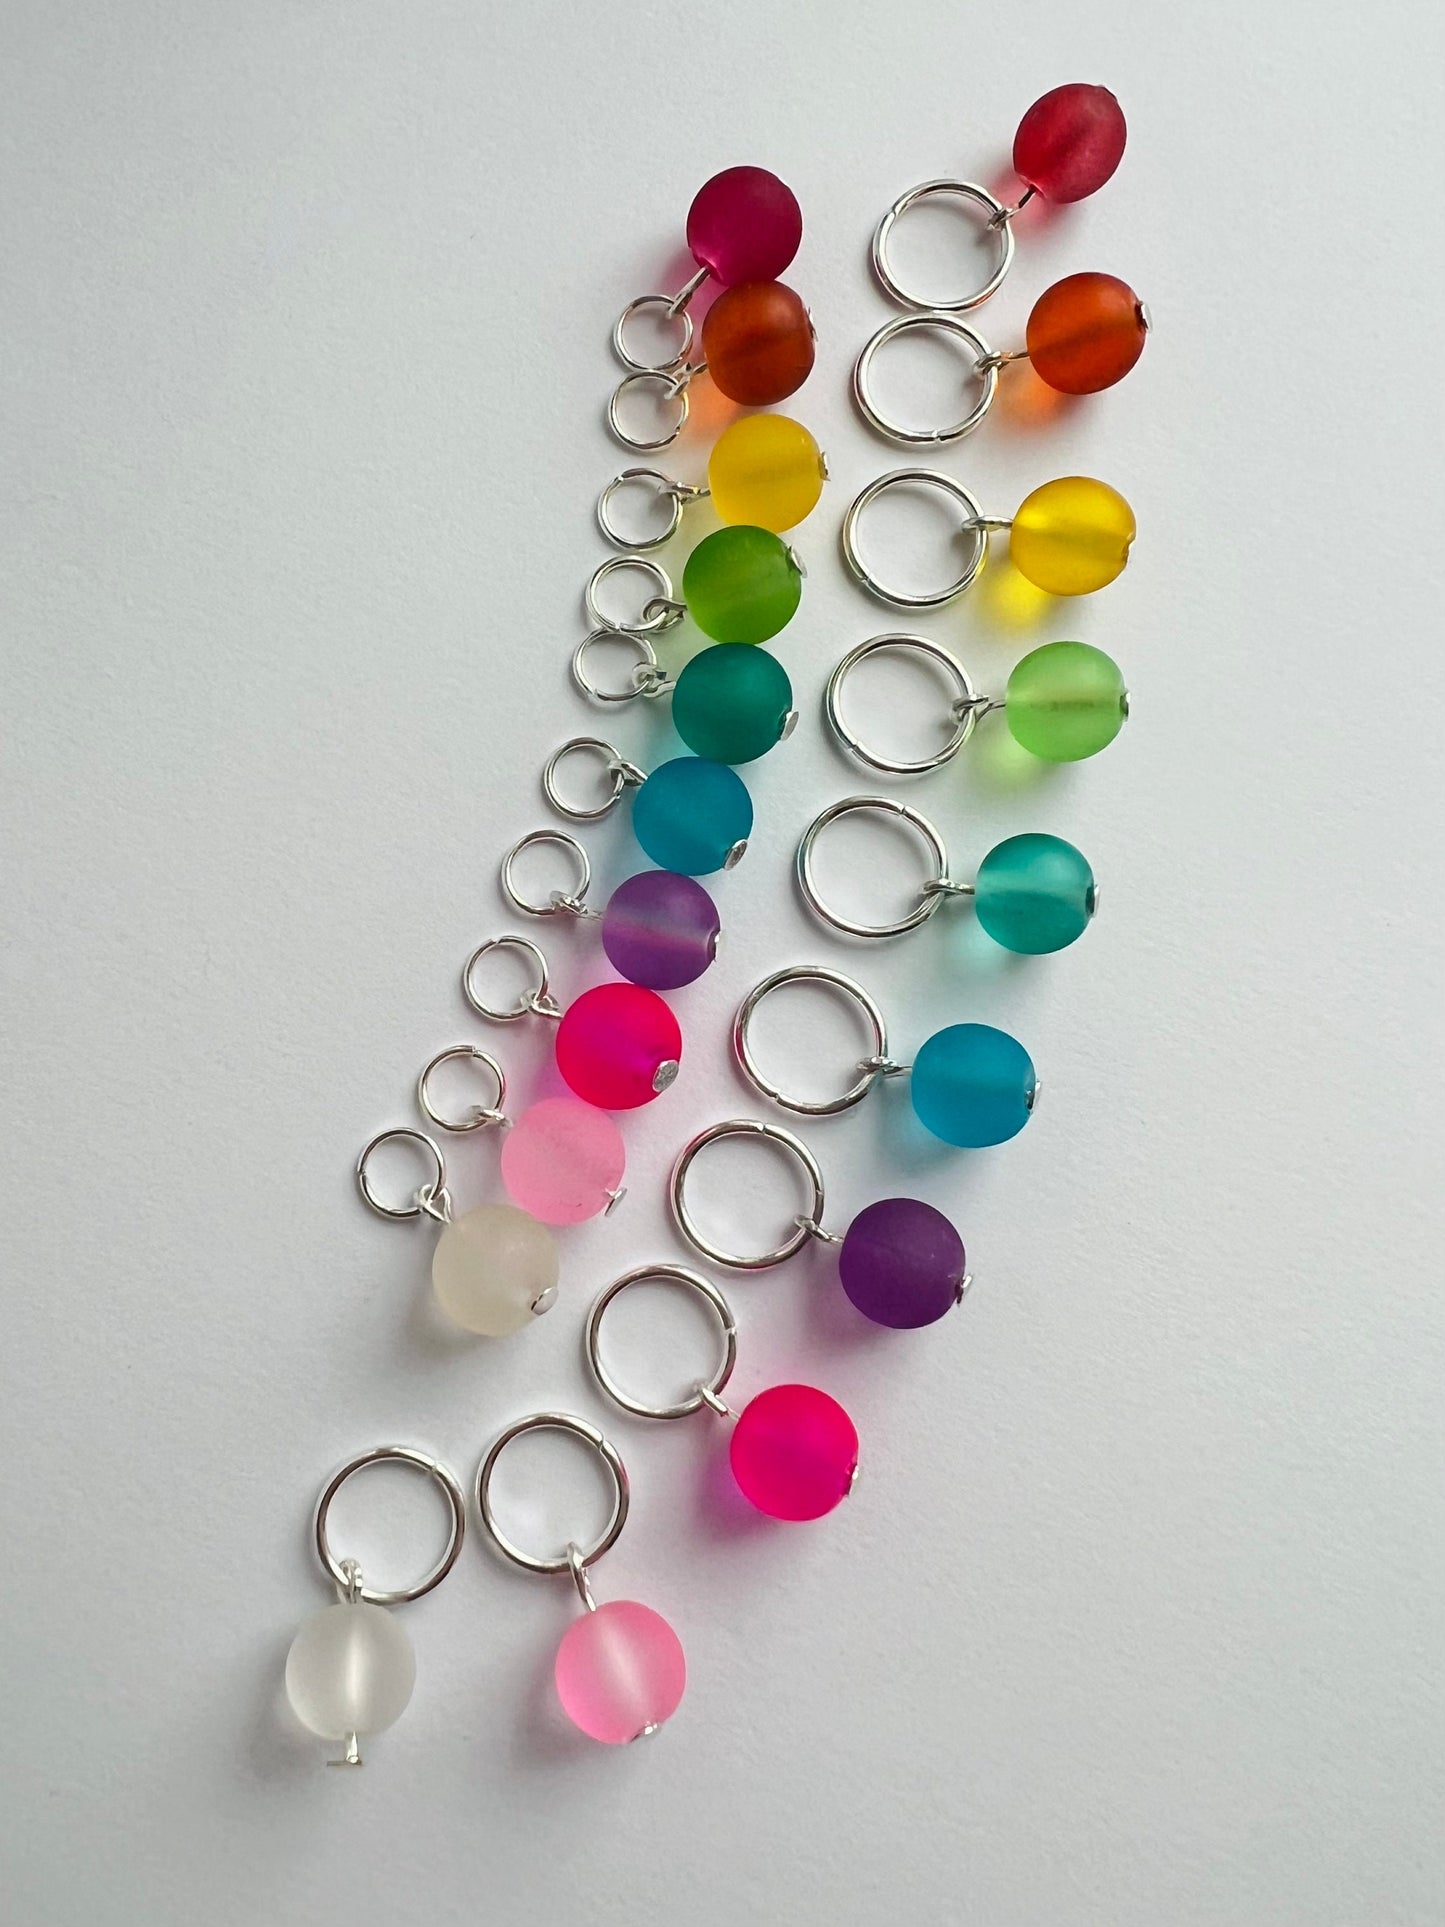 Knitting Stitch Markers by RosyRetro - Frosted bon bons